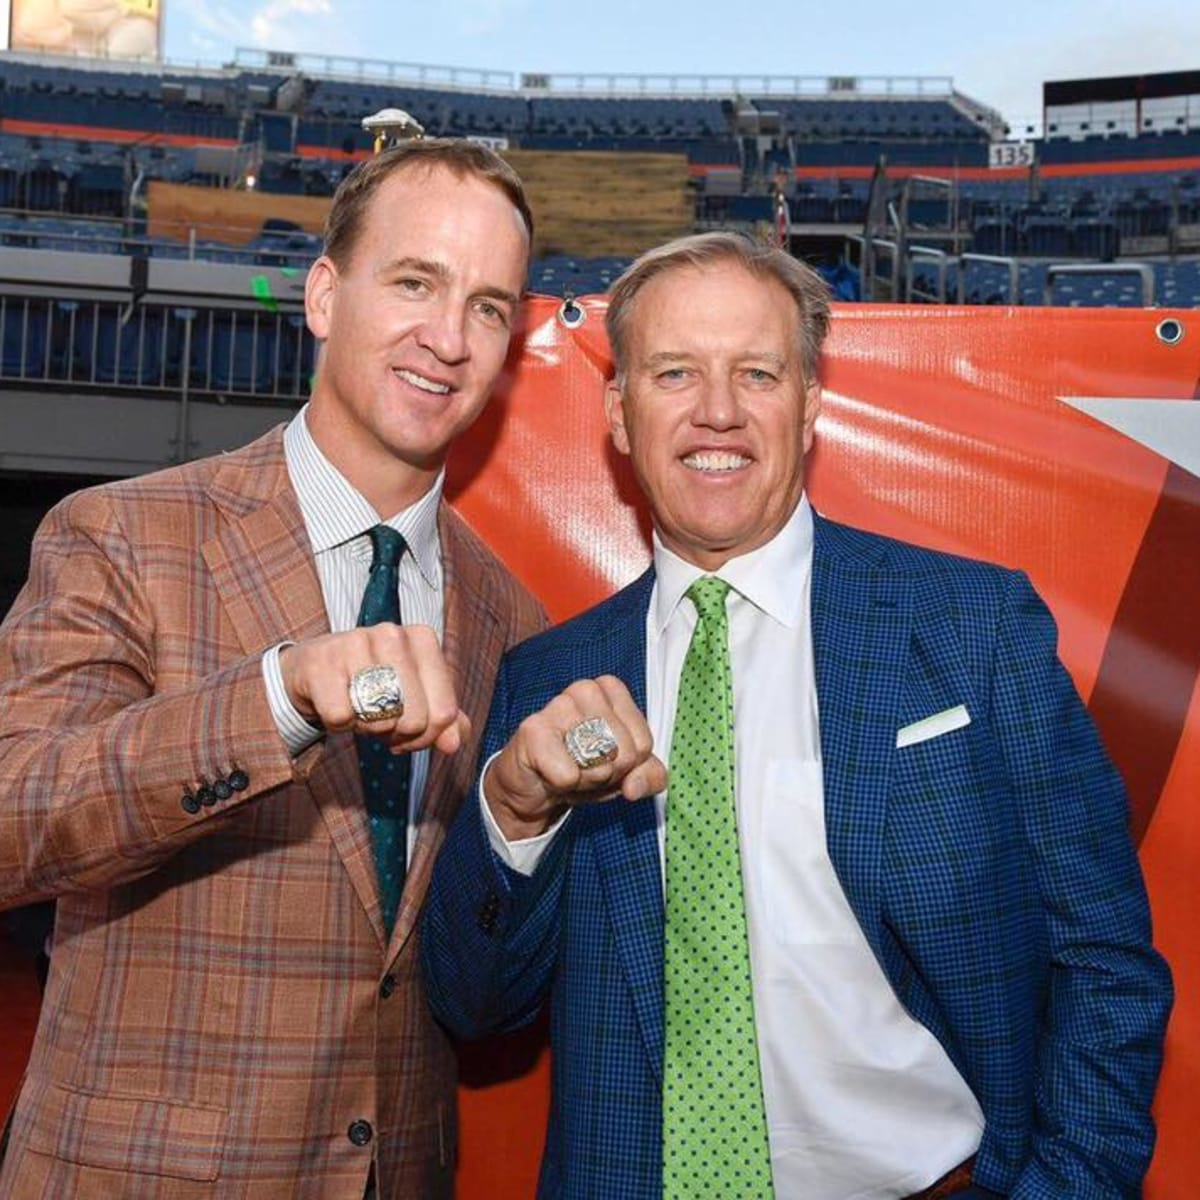 John Elway, Broncos agree to new 5-year deal - Denverite, the